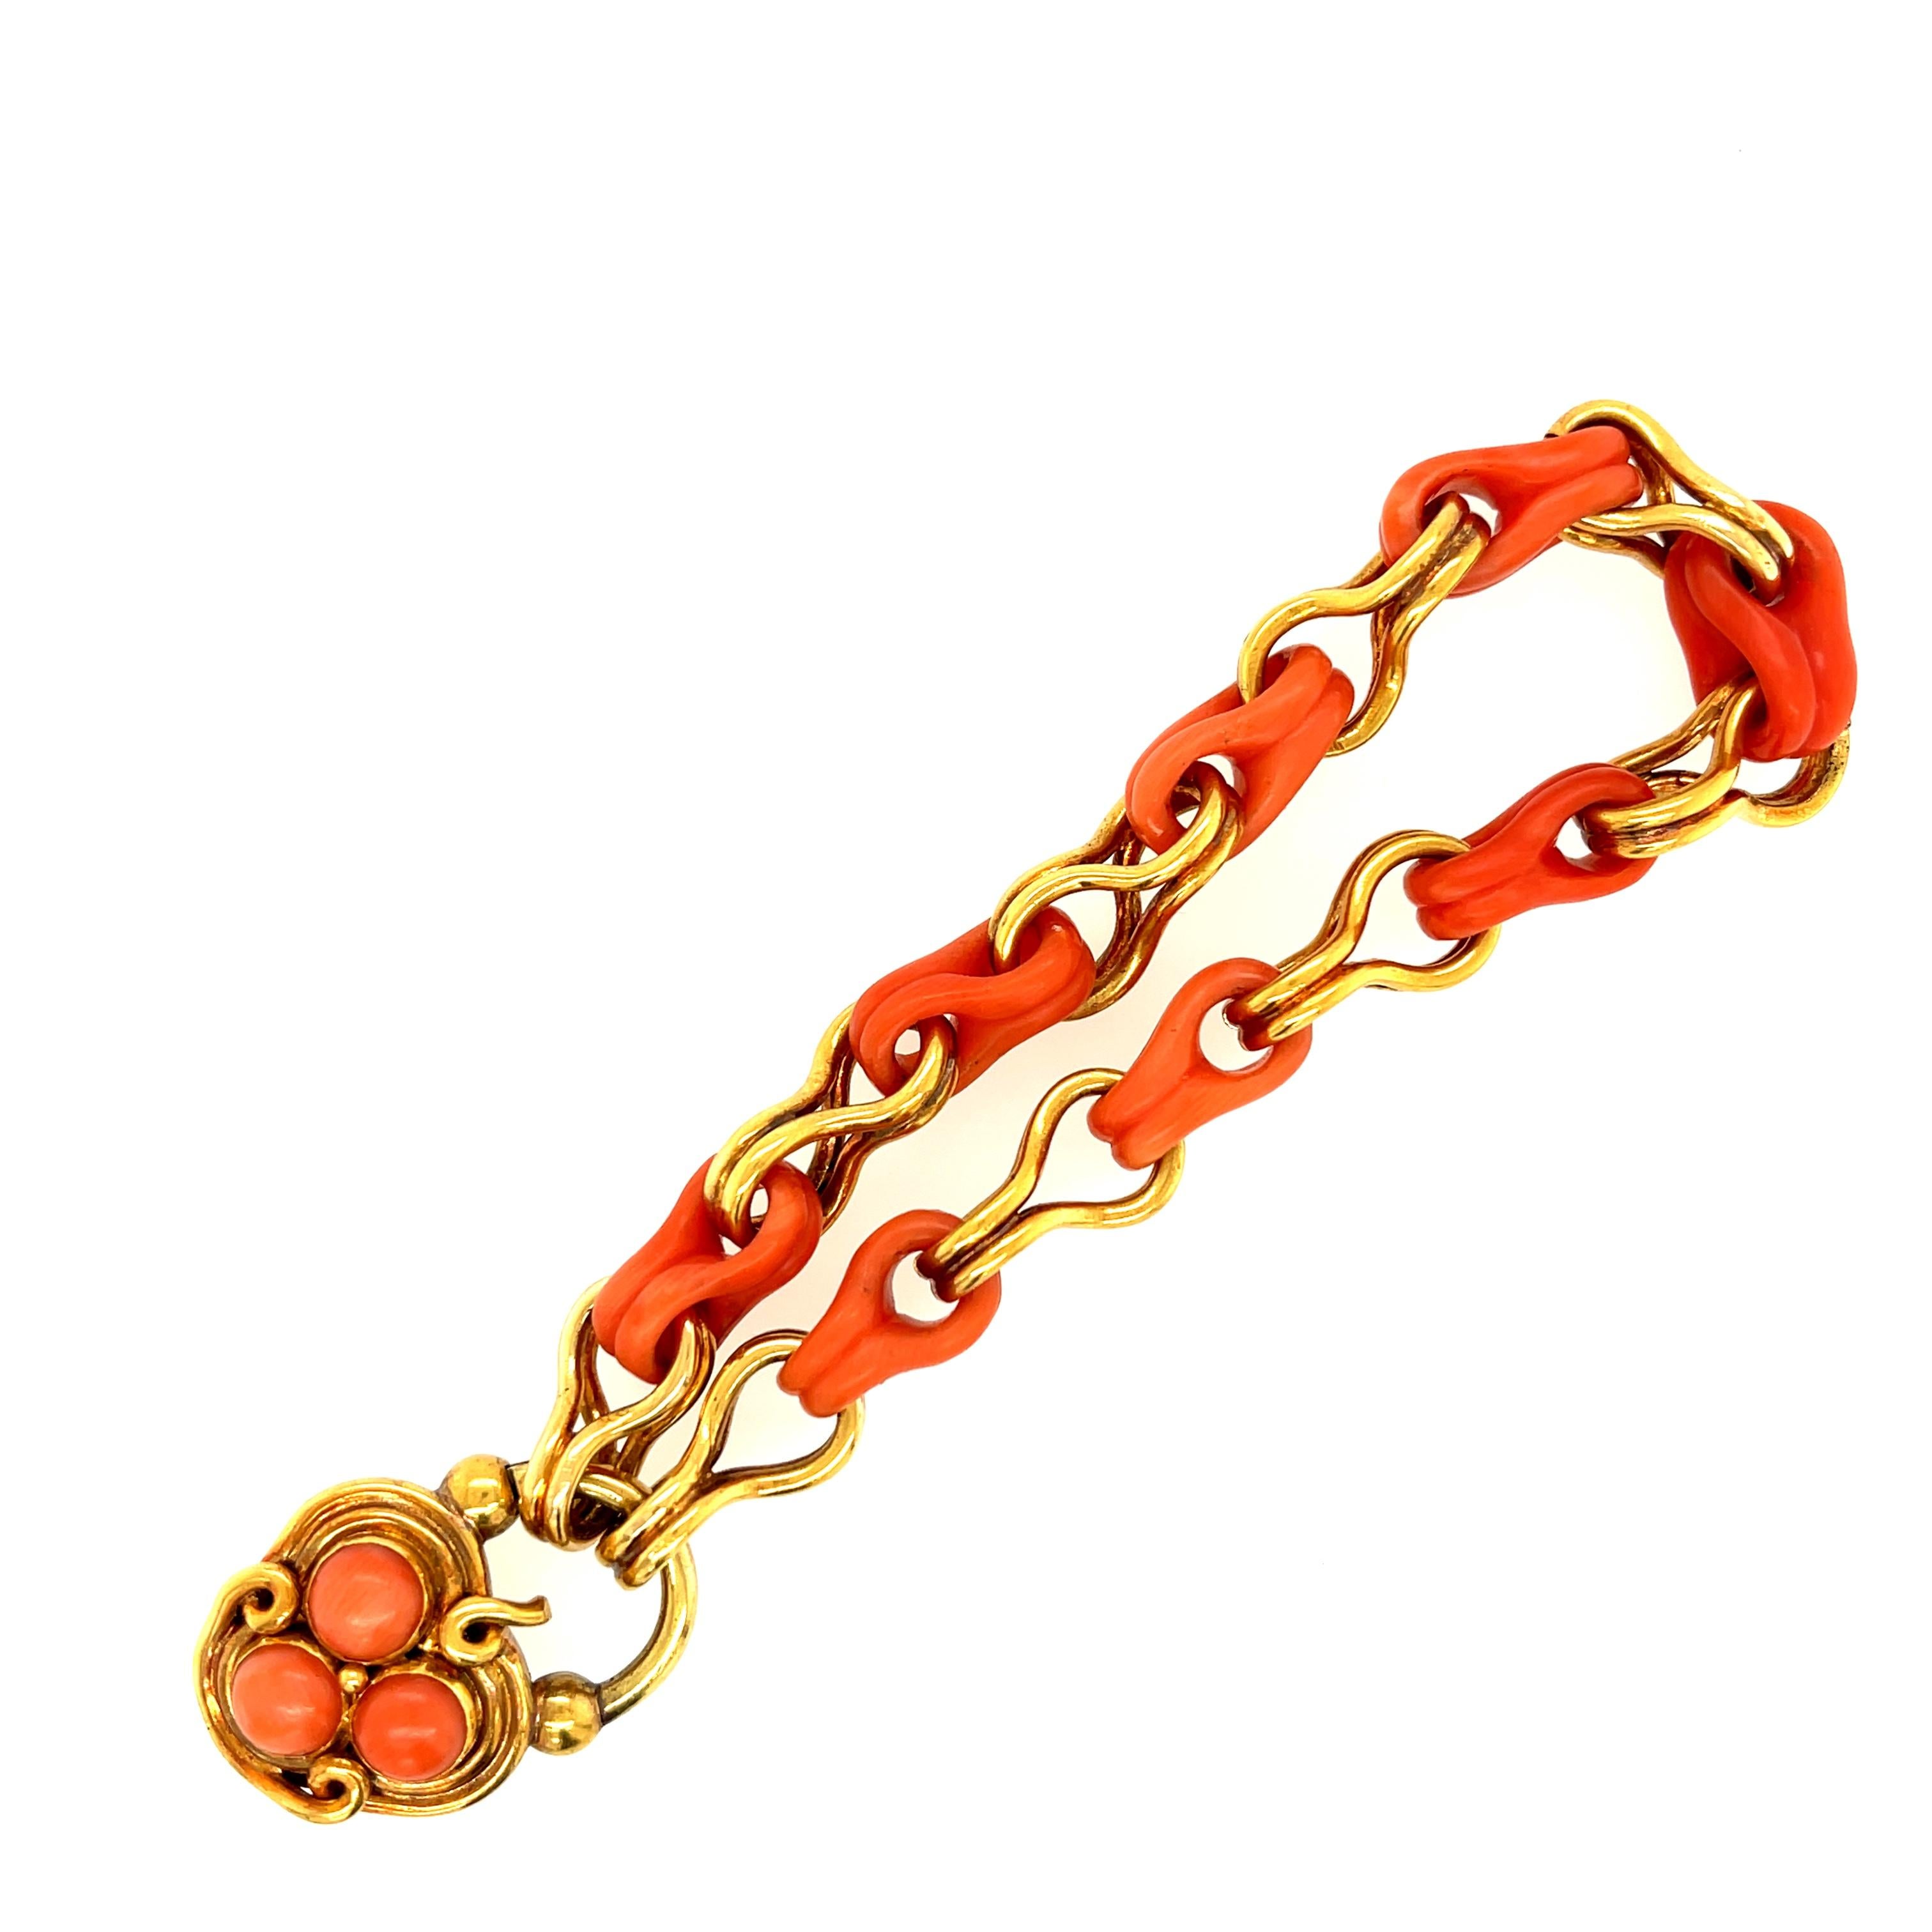 A rare and unusual Victorian coral gold bracelet with a coral set padlock claps. The gold tests for 18k gold. The chain bracelet is made up of alternating gold links with matching carved coral links, the padlock locket opens to secure the bracelet